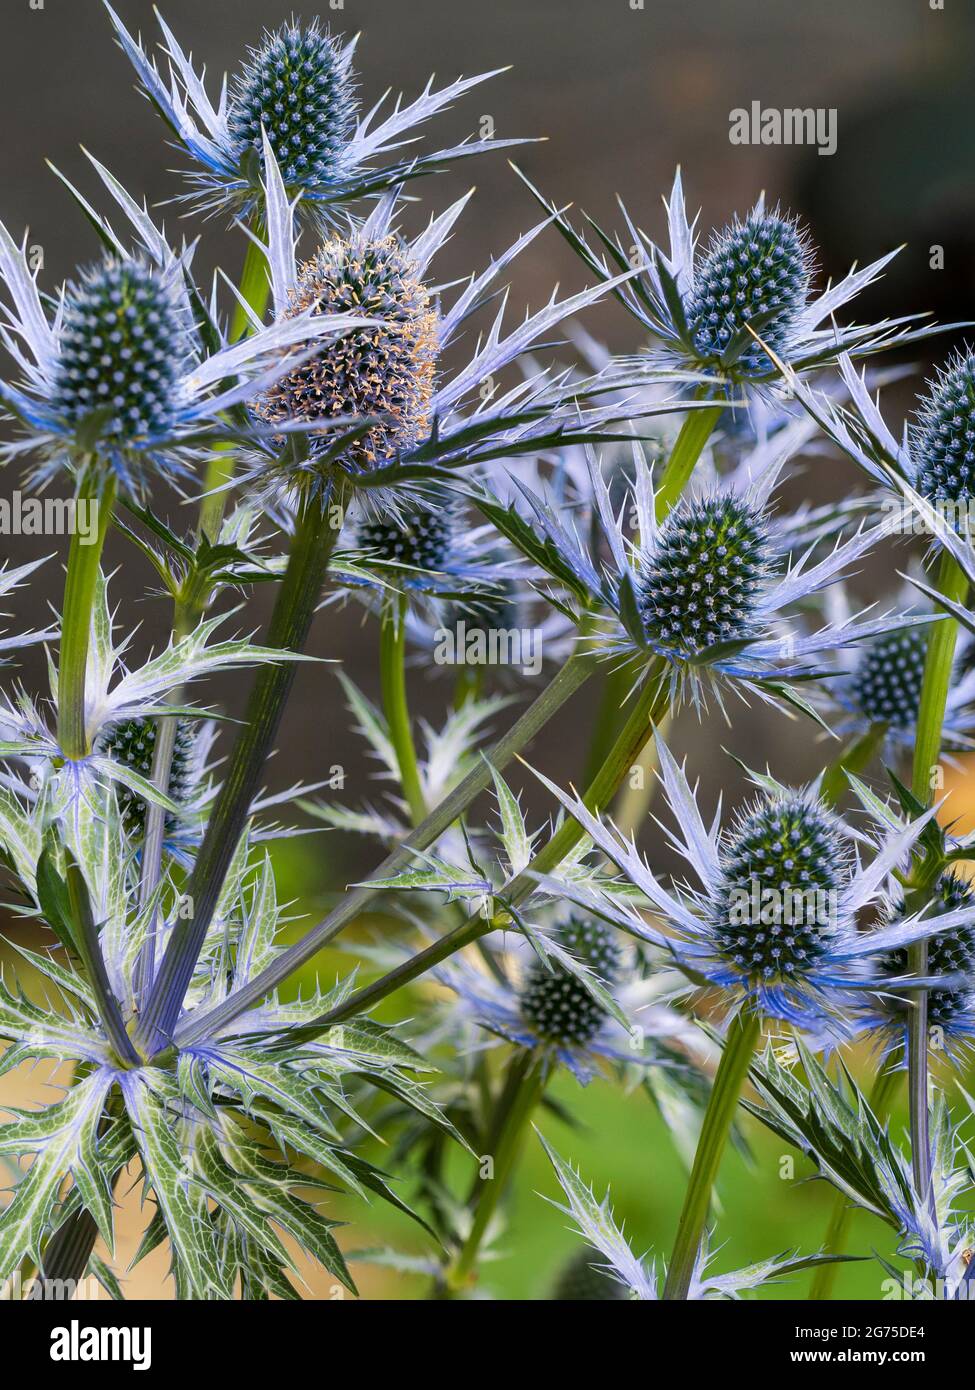 Mid summer blue violet flowers of the spiky herbaceous perennial sea holly, Eryngium x zabelii 'Big Blue' Stock Photo